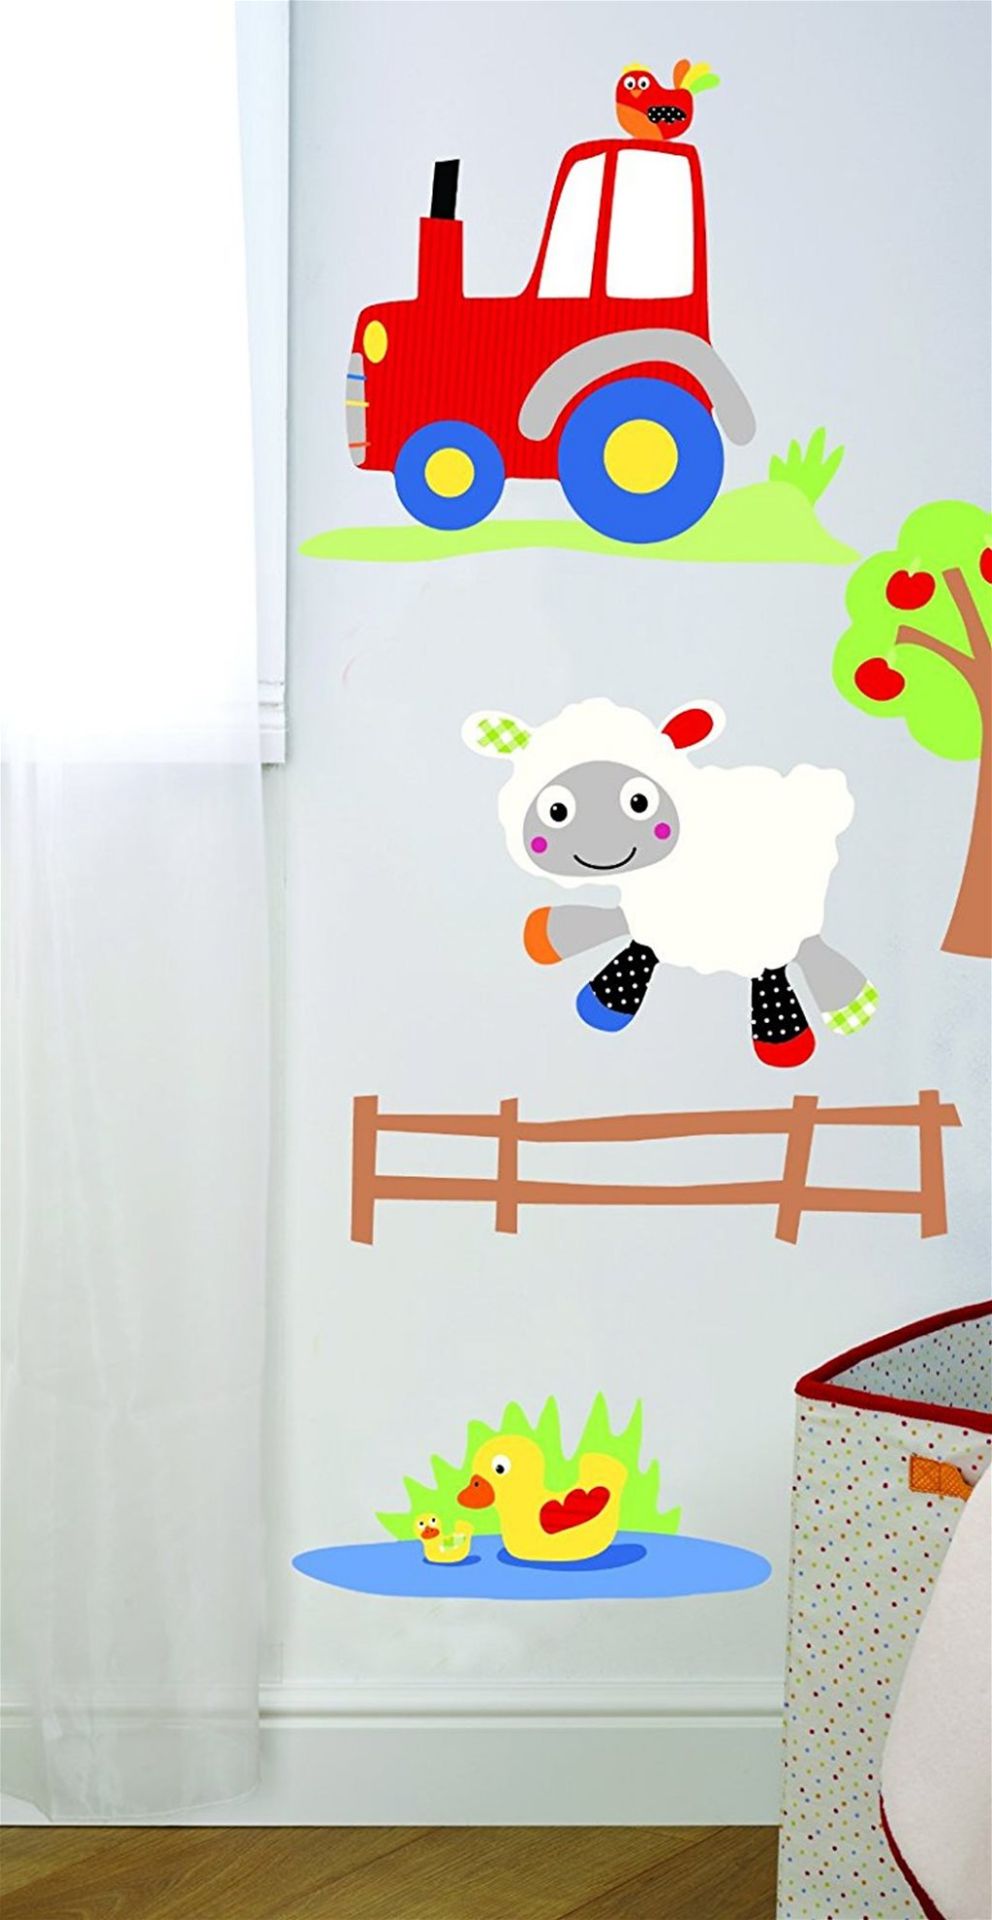 50 sets Funberry Farm Nursery MakeOver Kit (Over 70 Wall Stickers to Decorate the Whole Bedroom) - Image 3 of 3